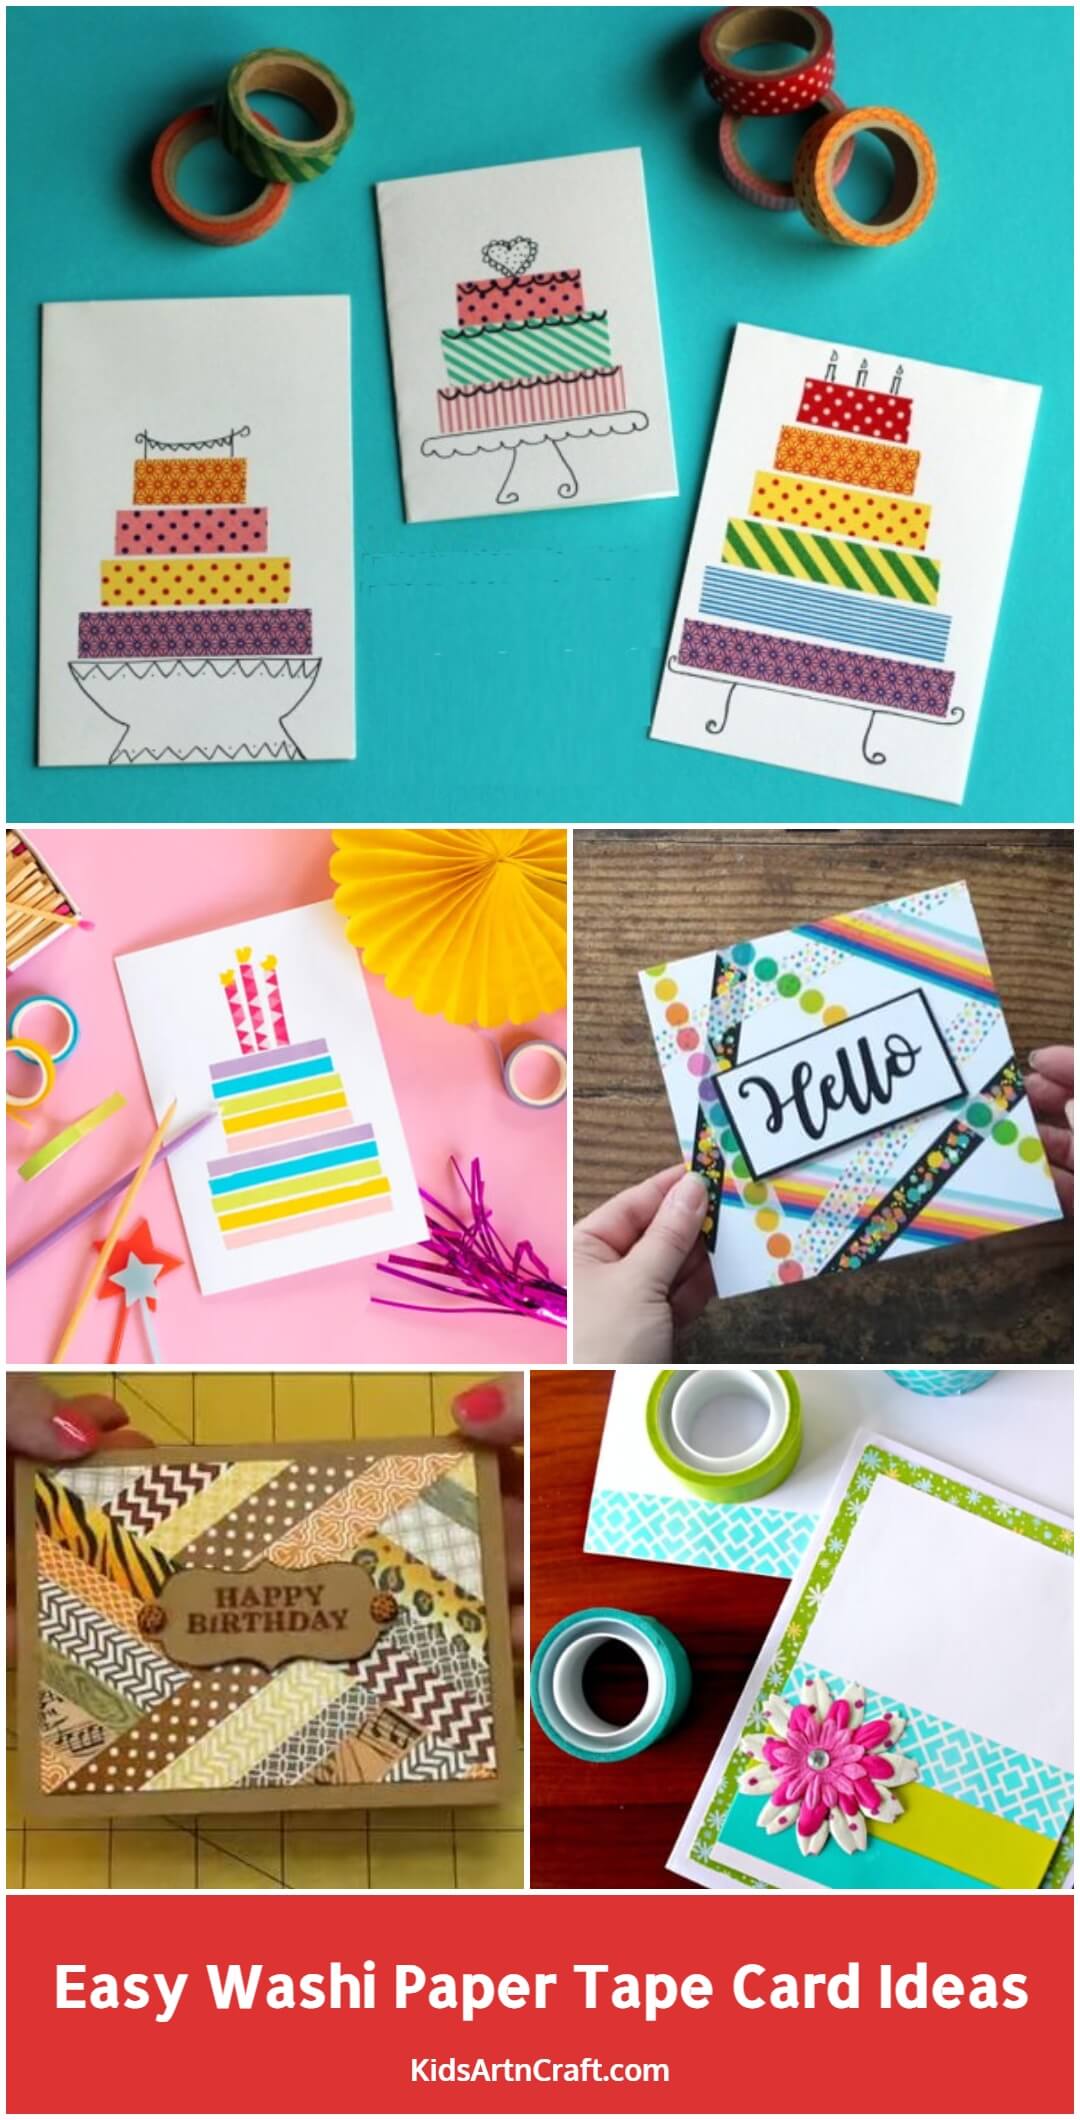 Easy Washi Paper Tape Card Ideas